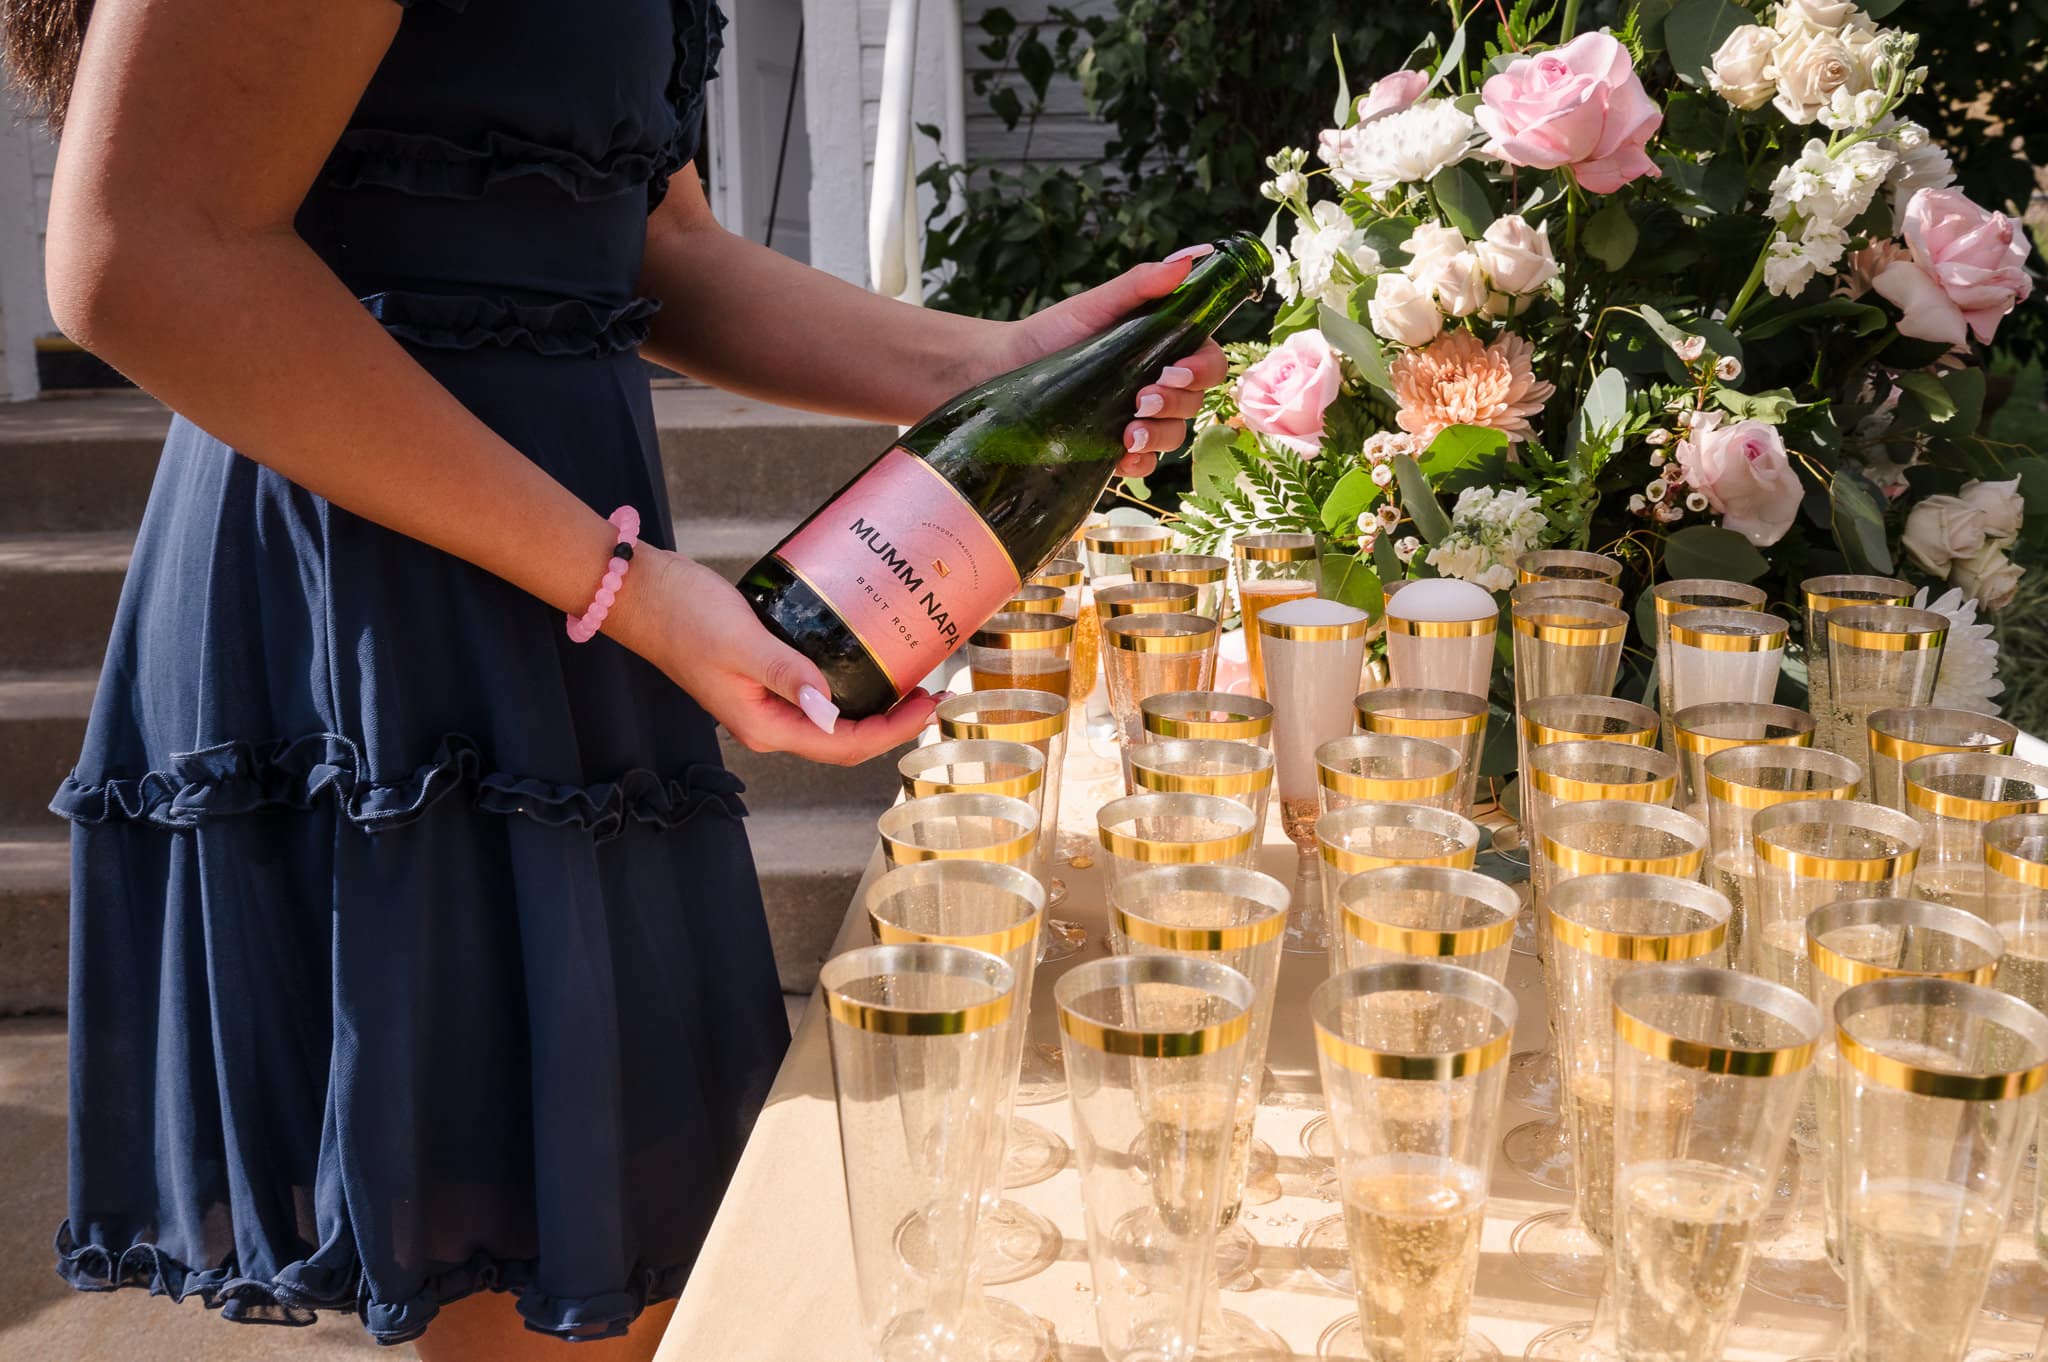 A young woman pours champagne into glasses set on a table after a wedding.